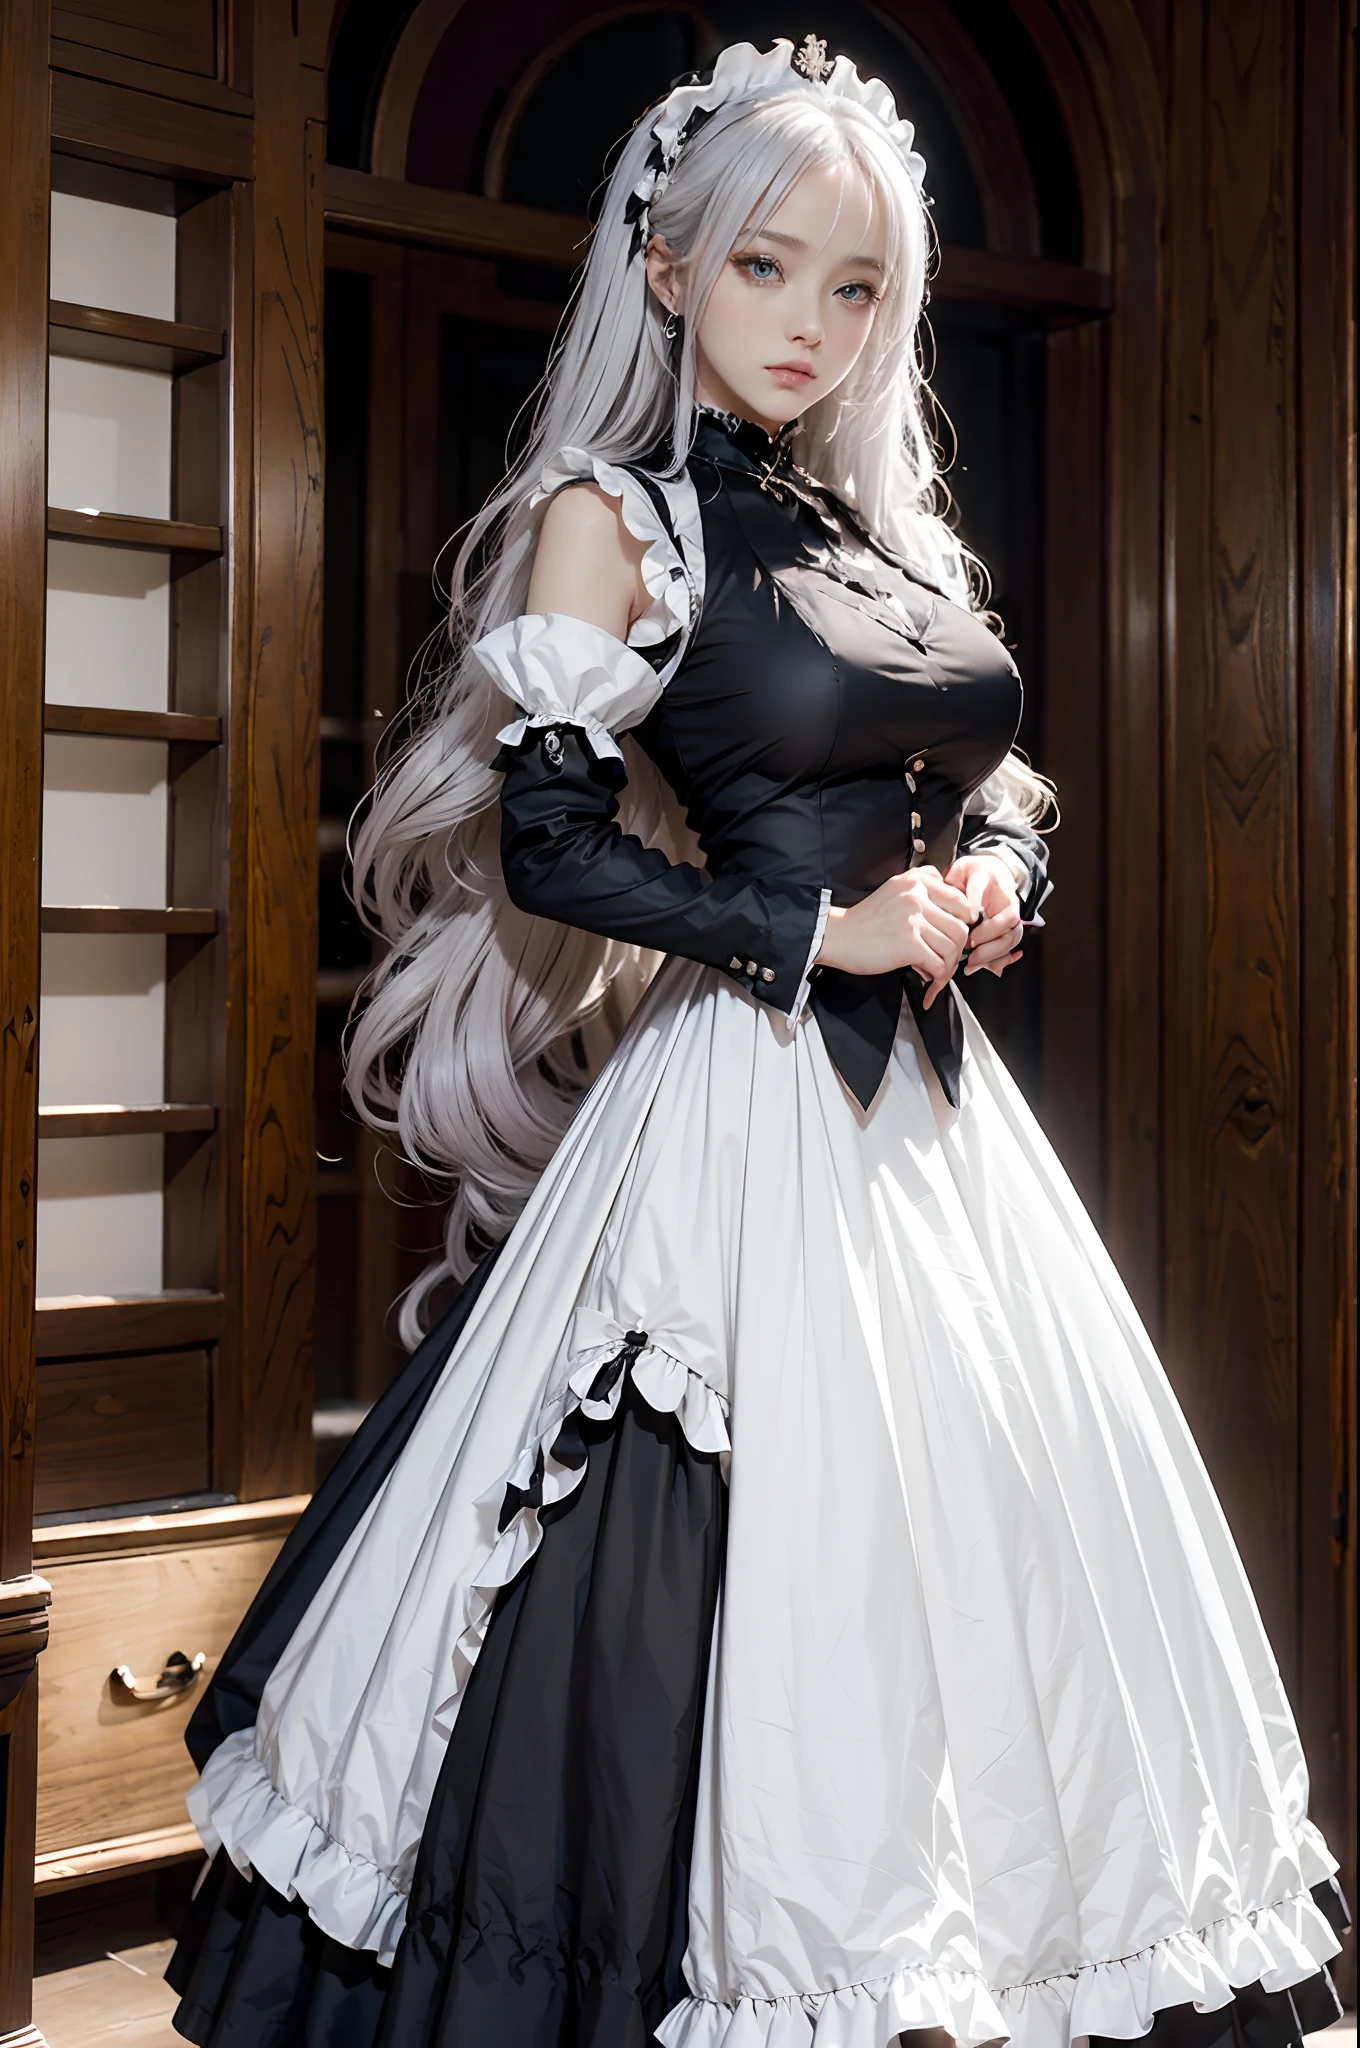 The woman, (European Citizenship: 1.2) In a black and white outfit posing for a photo, maiden! Dress, Anime Girl Cosplay, anime girl in a maid costume, The Magnificent Maiden, maid outfit, cosplay photo, cosplay, anime cosplay, A Few Cute Poses, (Заманчивый портрет Marvel's Storm: 1.2), (suntanned skin: 1.2) (snow-white hair!), (Face of the Goddess), (Elegant posture: 1.4), Elegant atmosphere, Noble atmosphere, (Milf: 1.6) (Shiny bright white hair: 1.5), (Cyan eyes: 1.4), (maidservant: 1.4), (Black and White Maid Outfit: 1.1), (Incredible beauty, High facial detail:1.3),